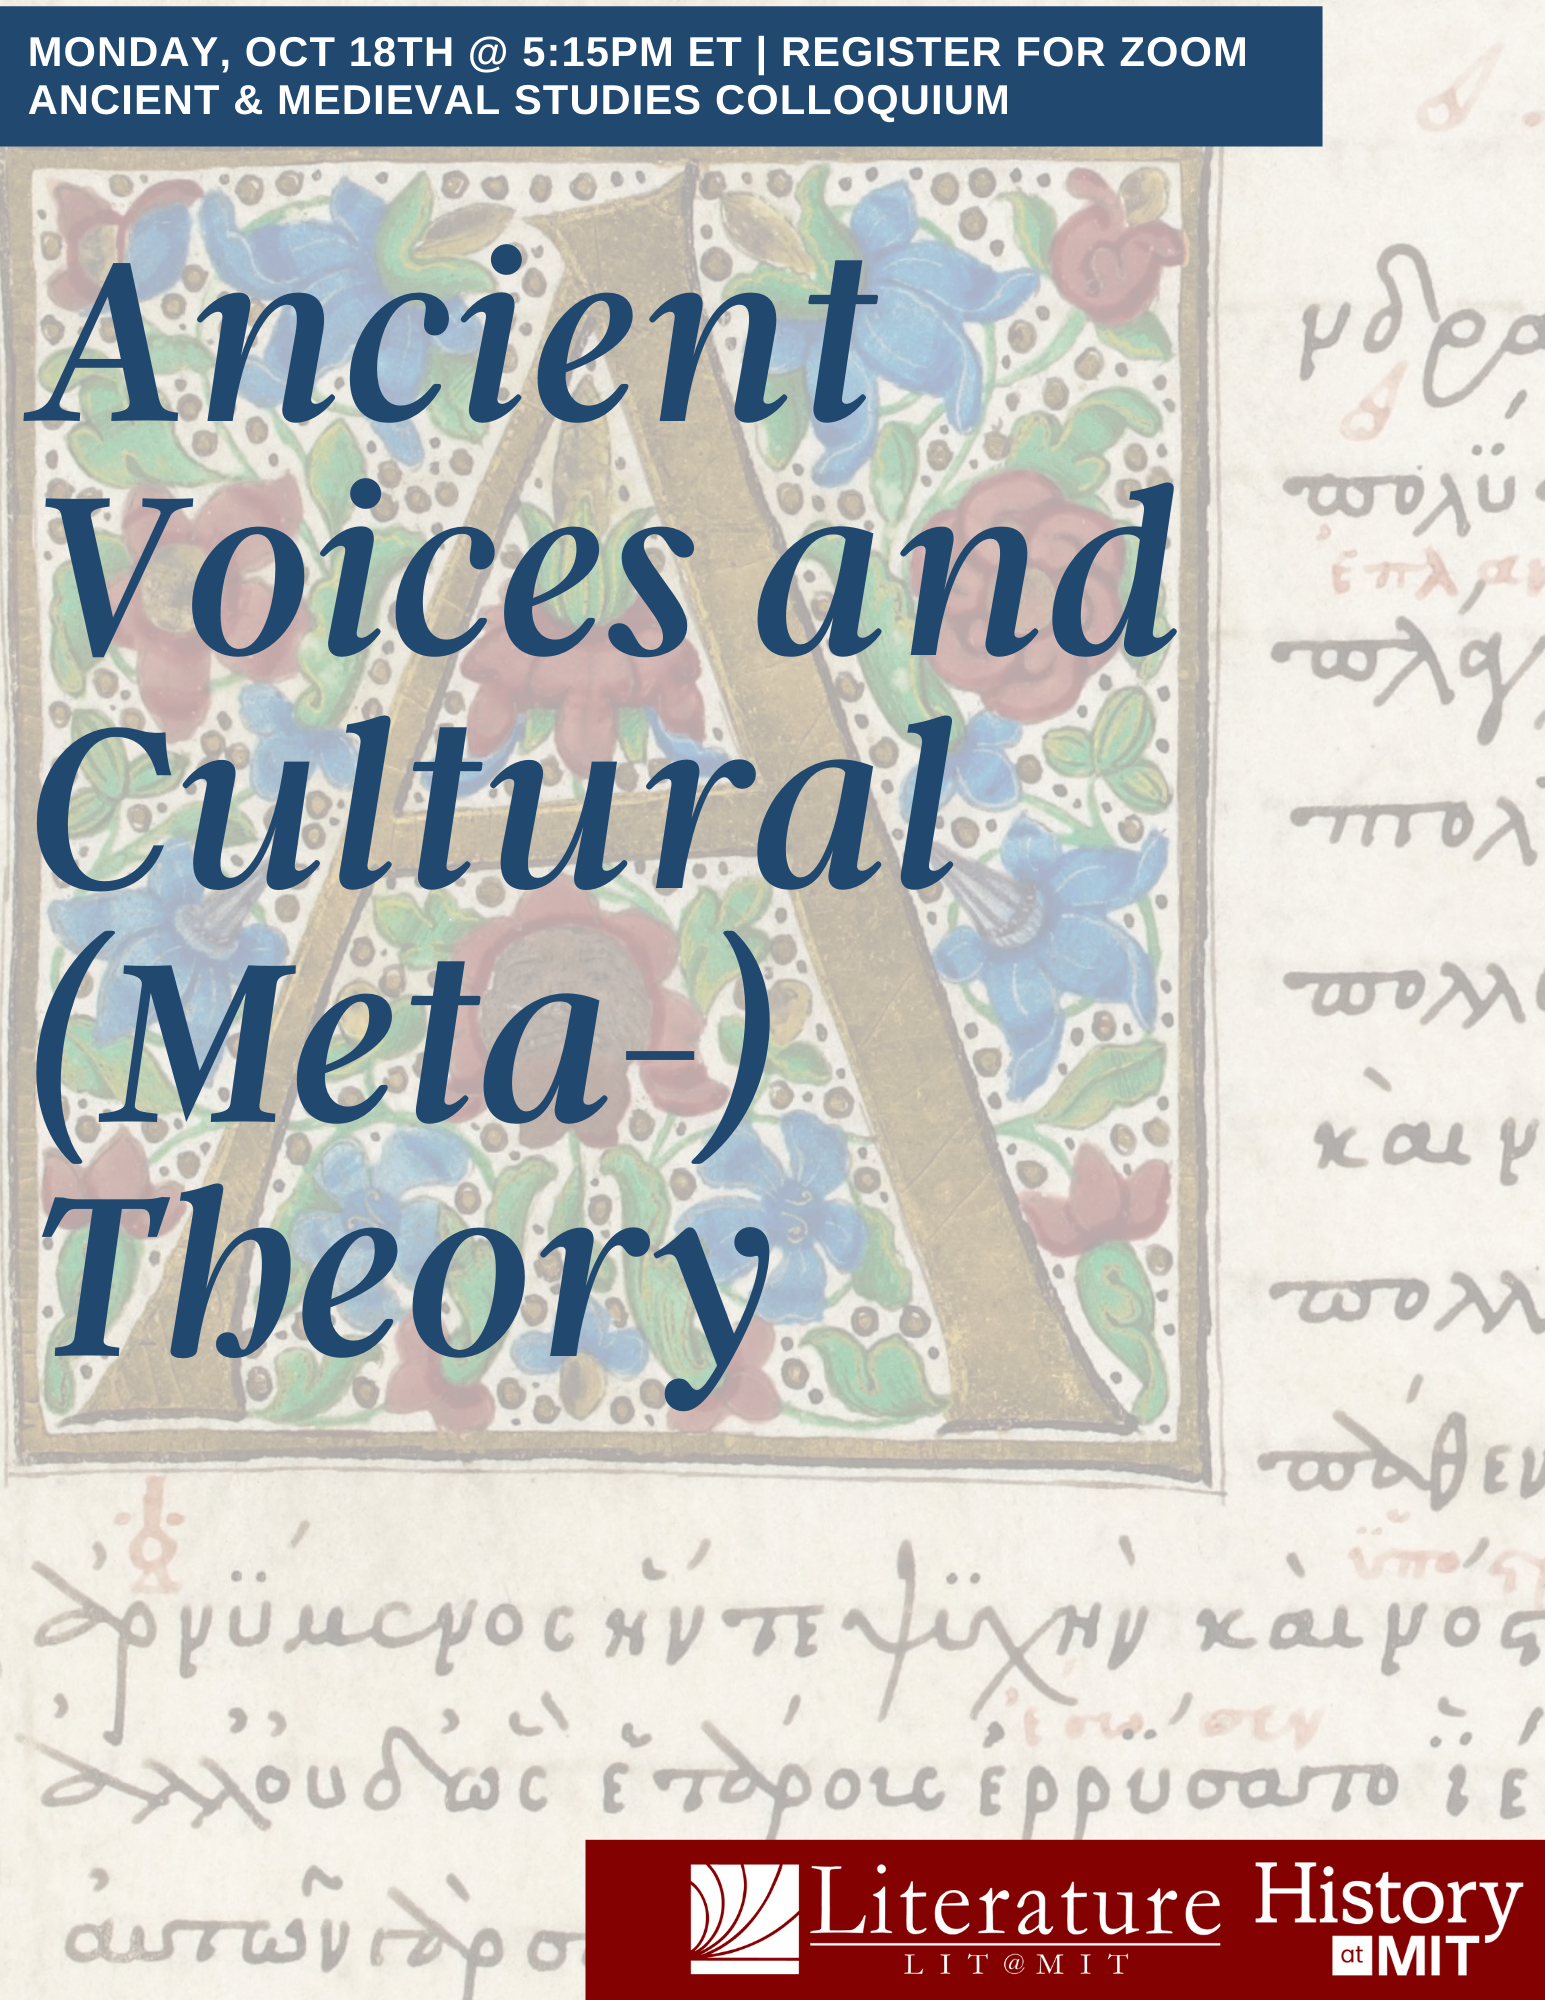 AMS presents, "Ancient Voices and Cultural (Meta-)Theory" with Lit & History Prof Alexander Forte